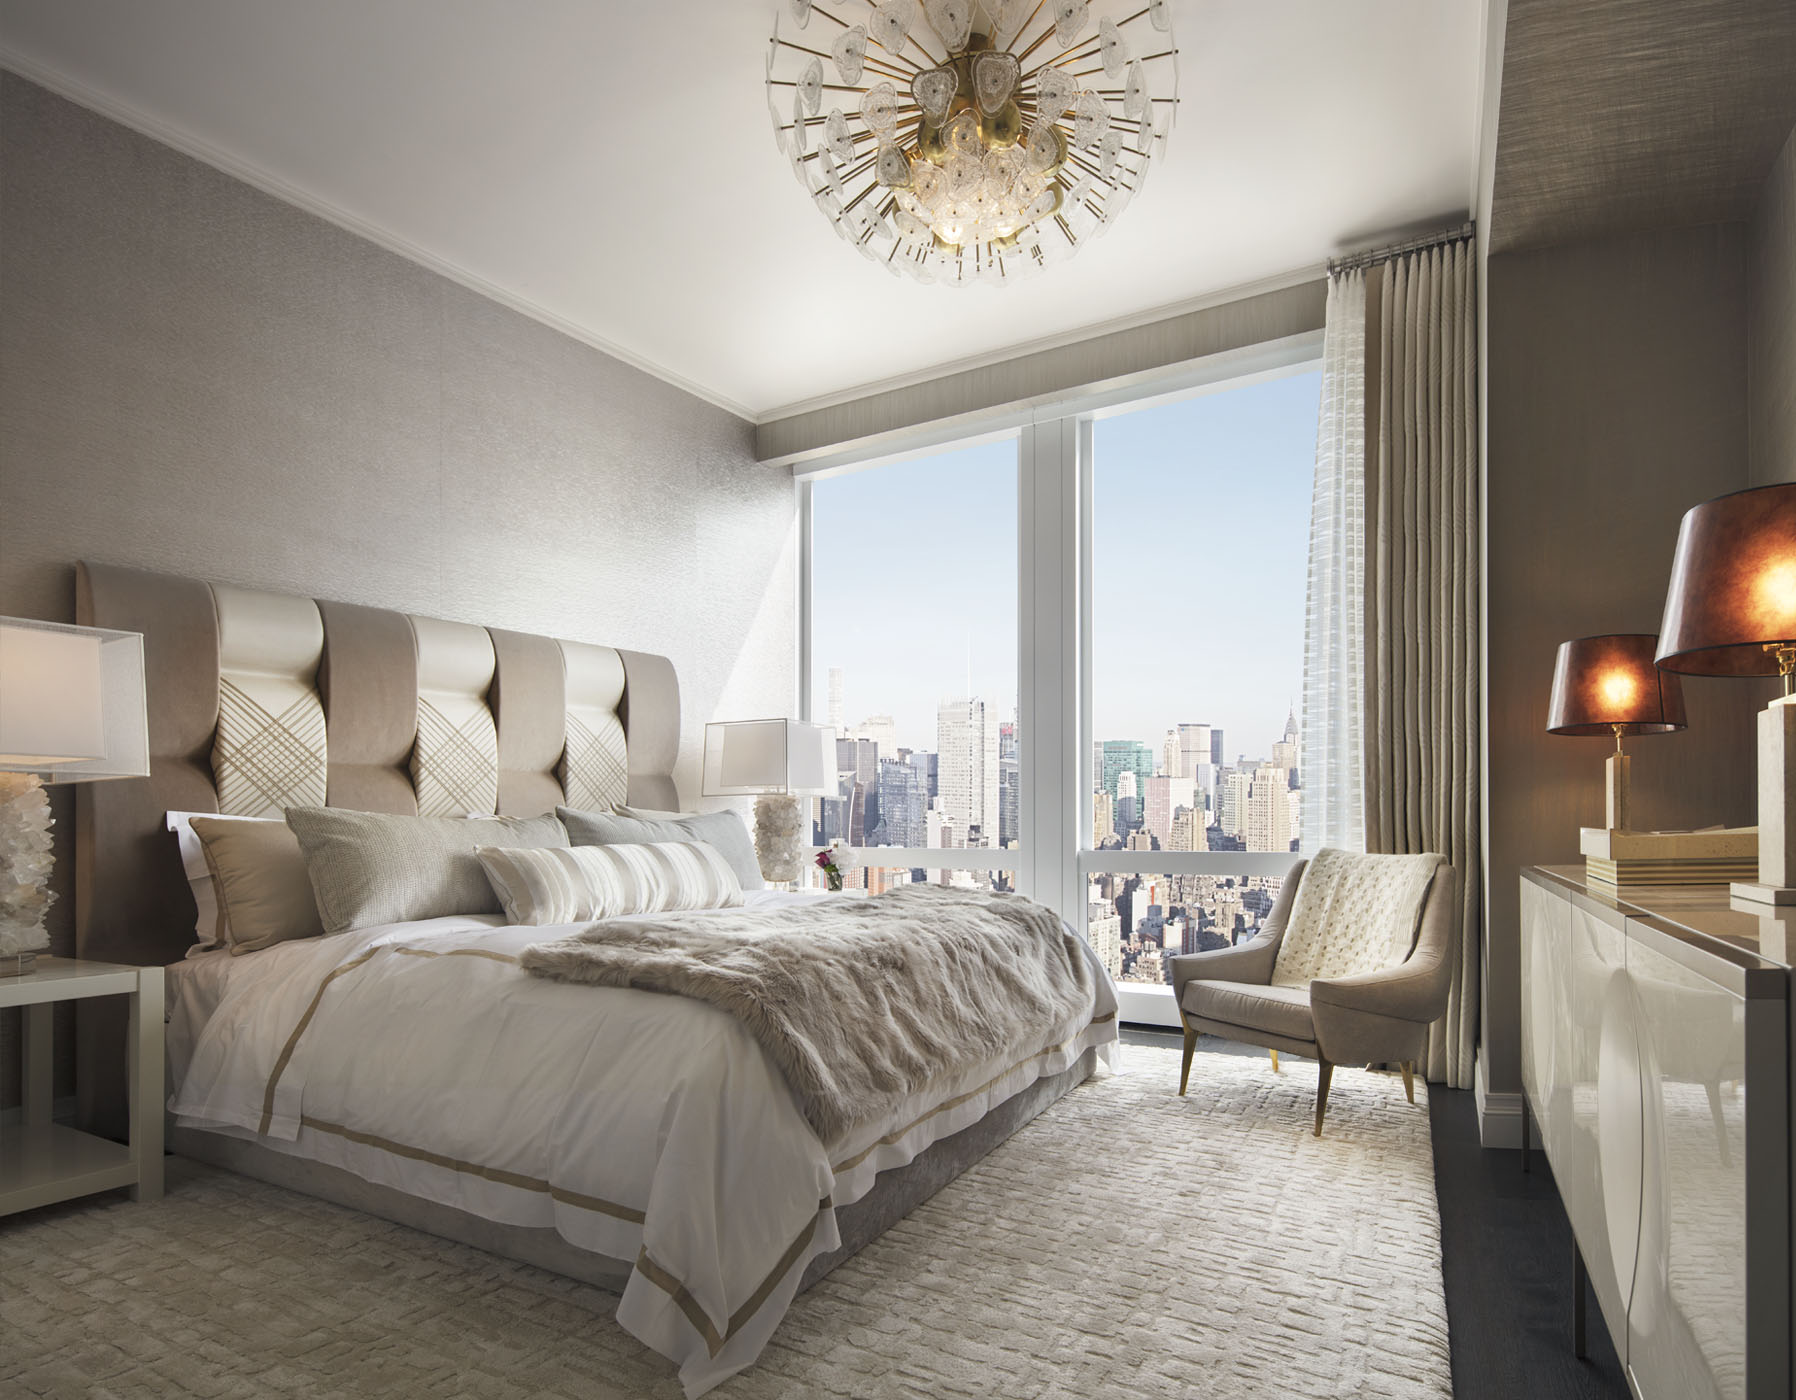 Secondary Bedroom Suite with city views to the east